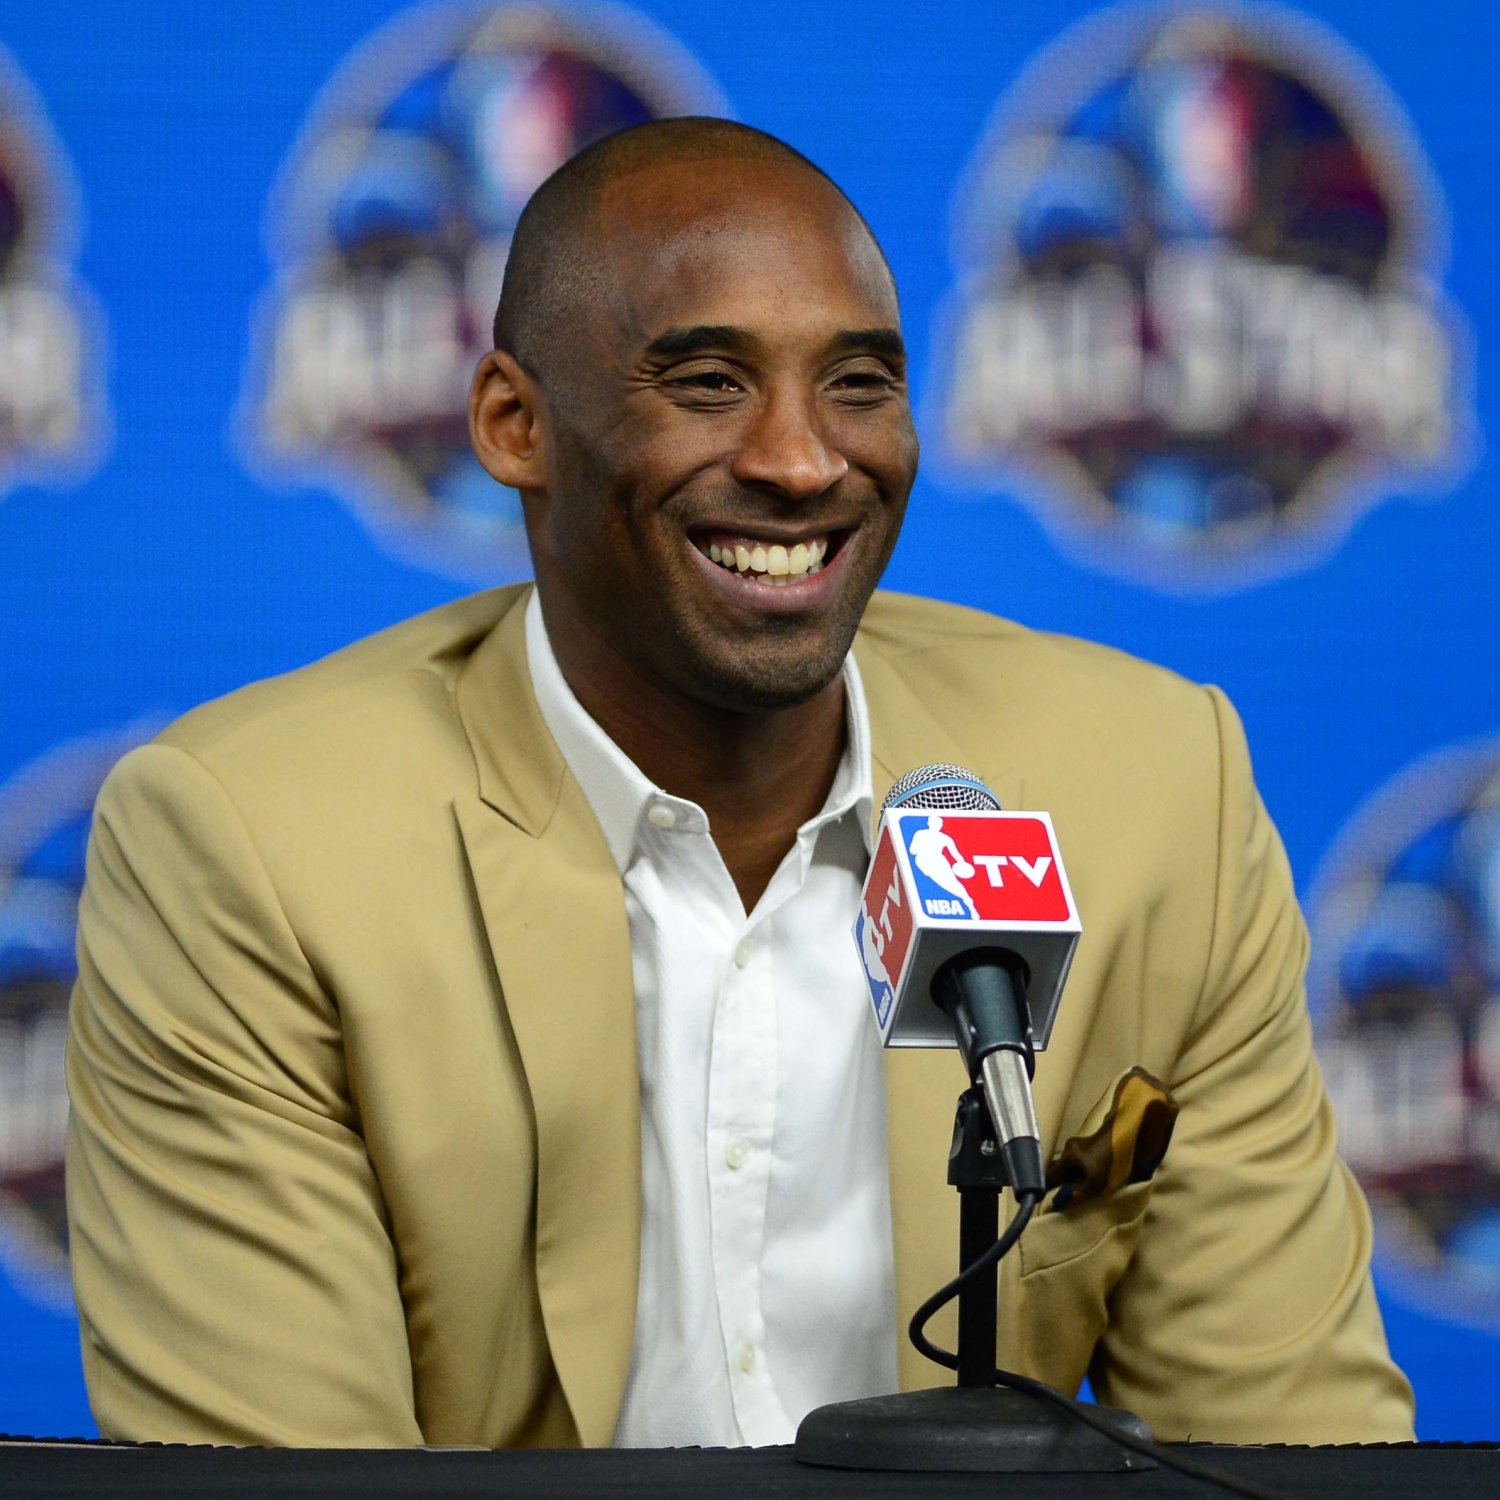 Kobe Bryant Launches New Company Kobe Inc. and Invests in Sports Drink | Bleacher Report